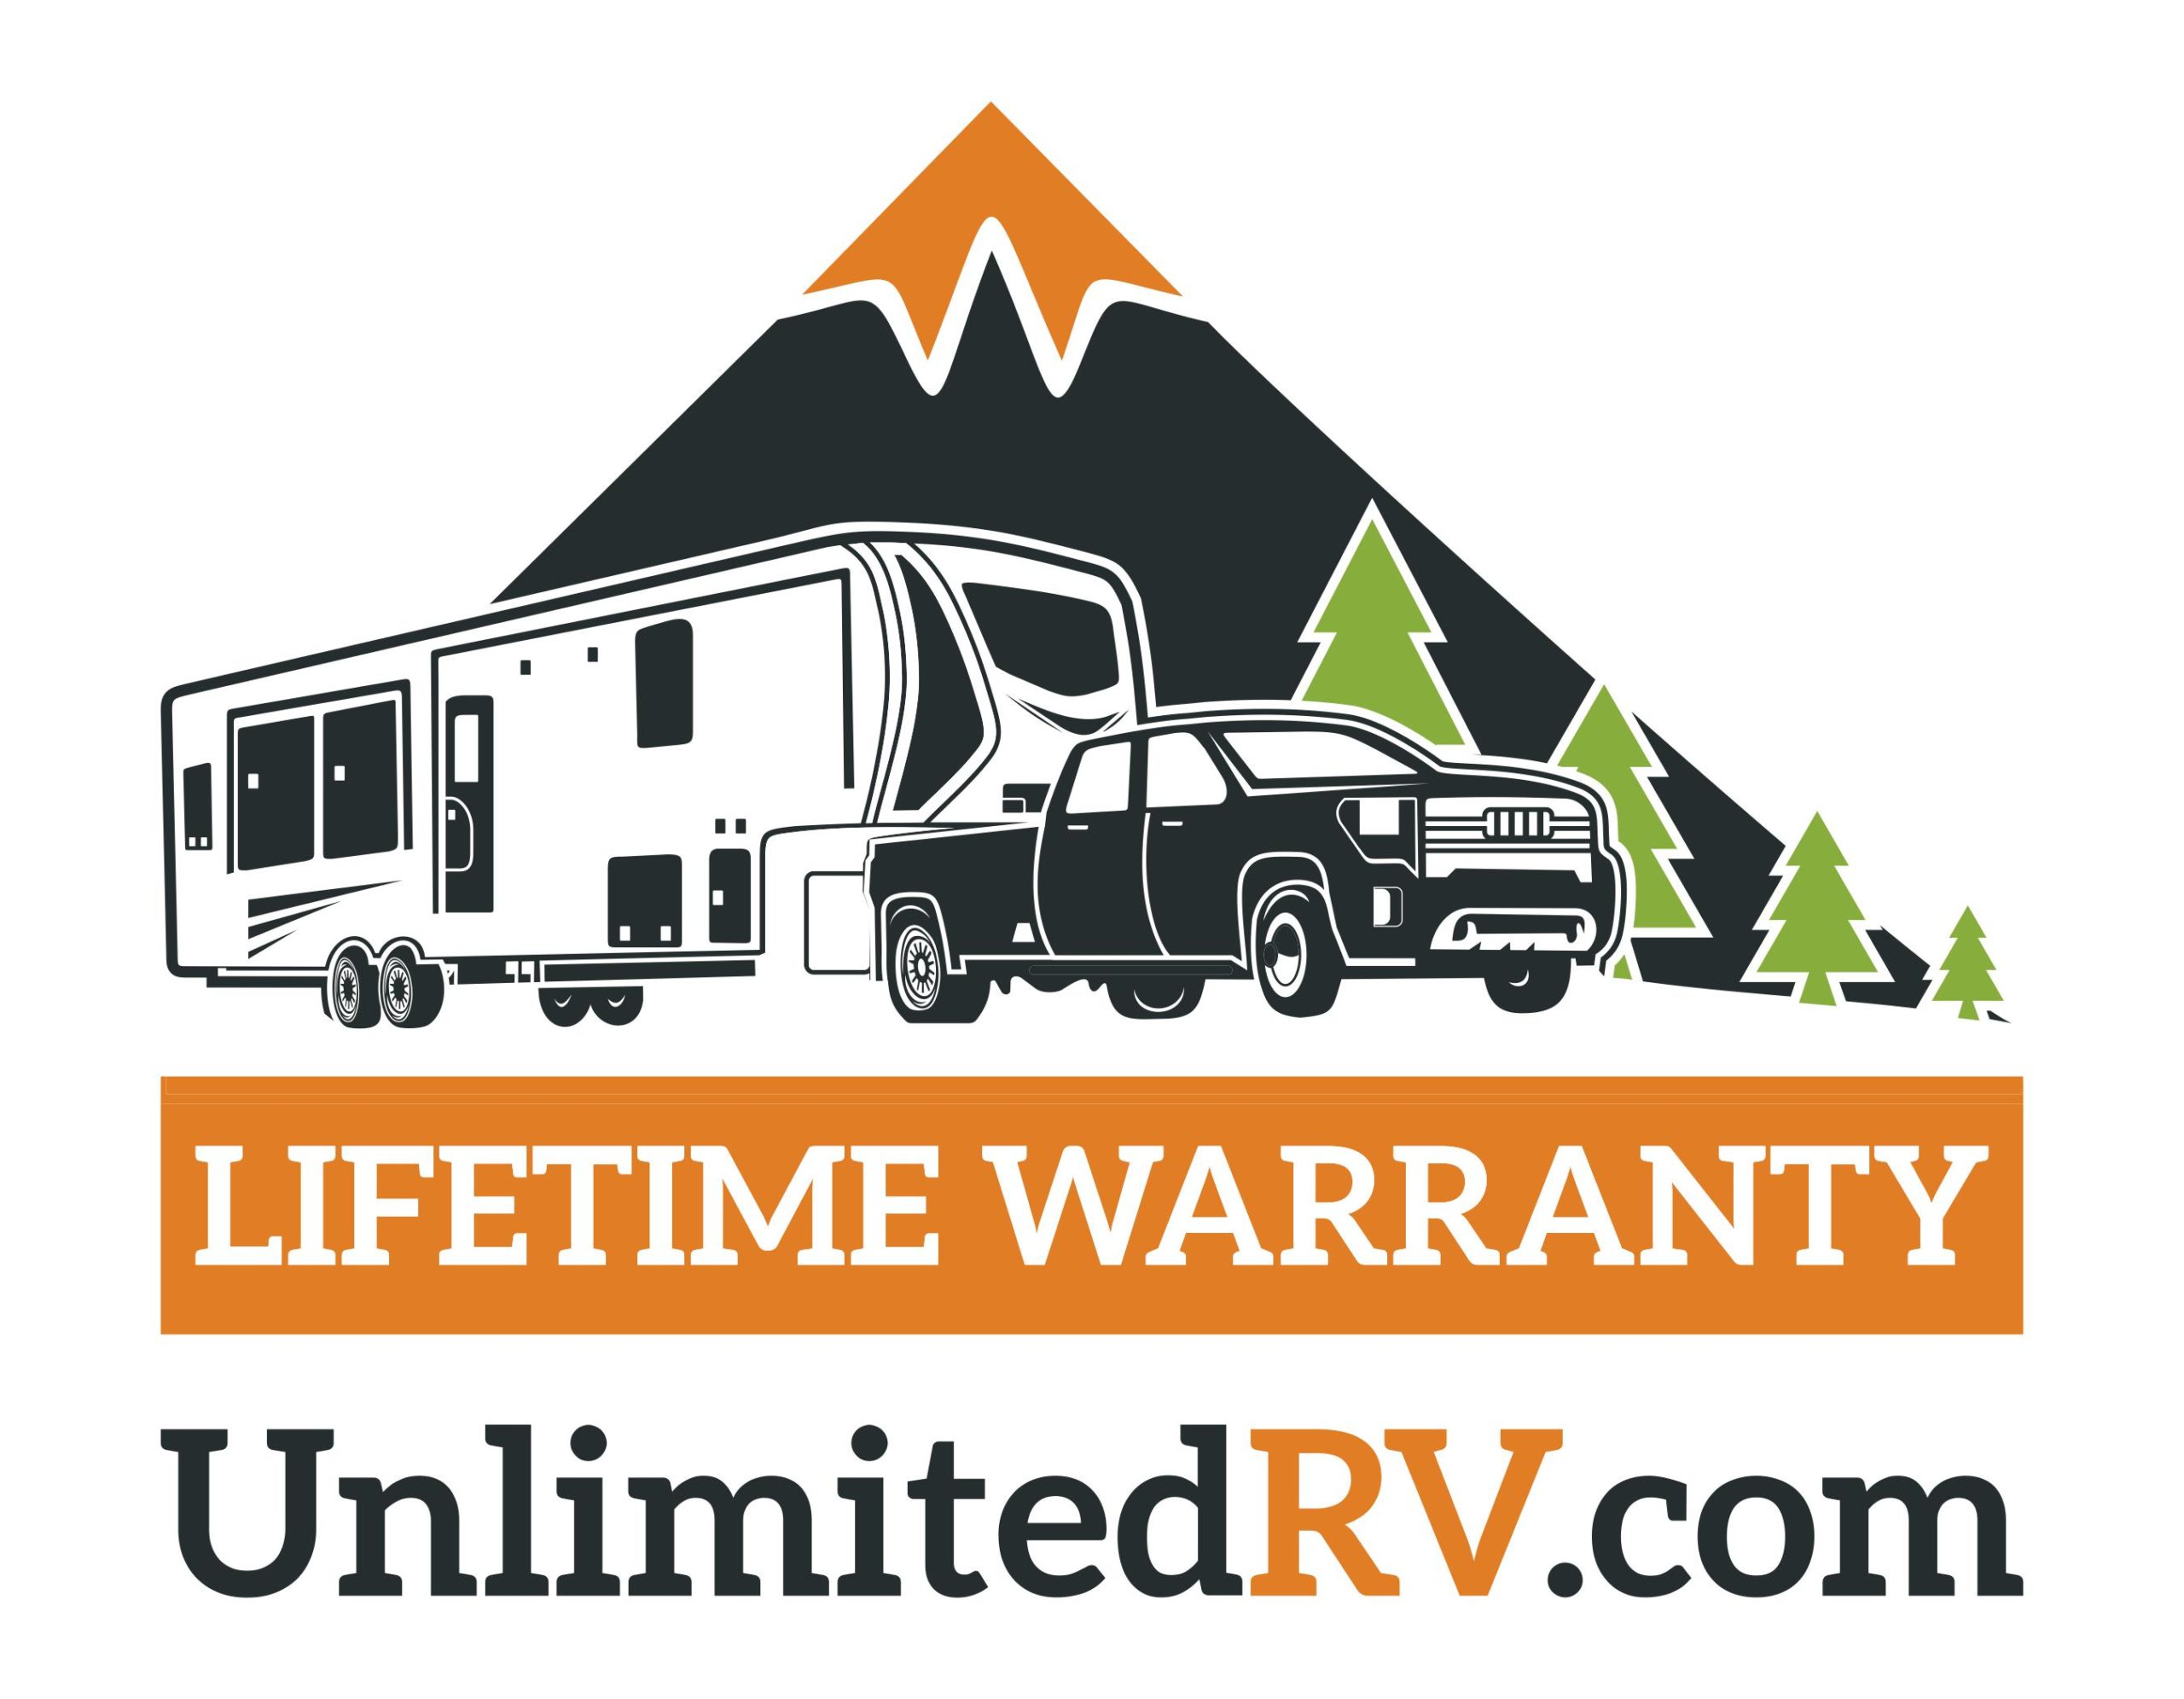 Unlimited RV